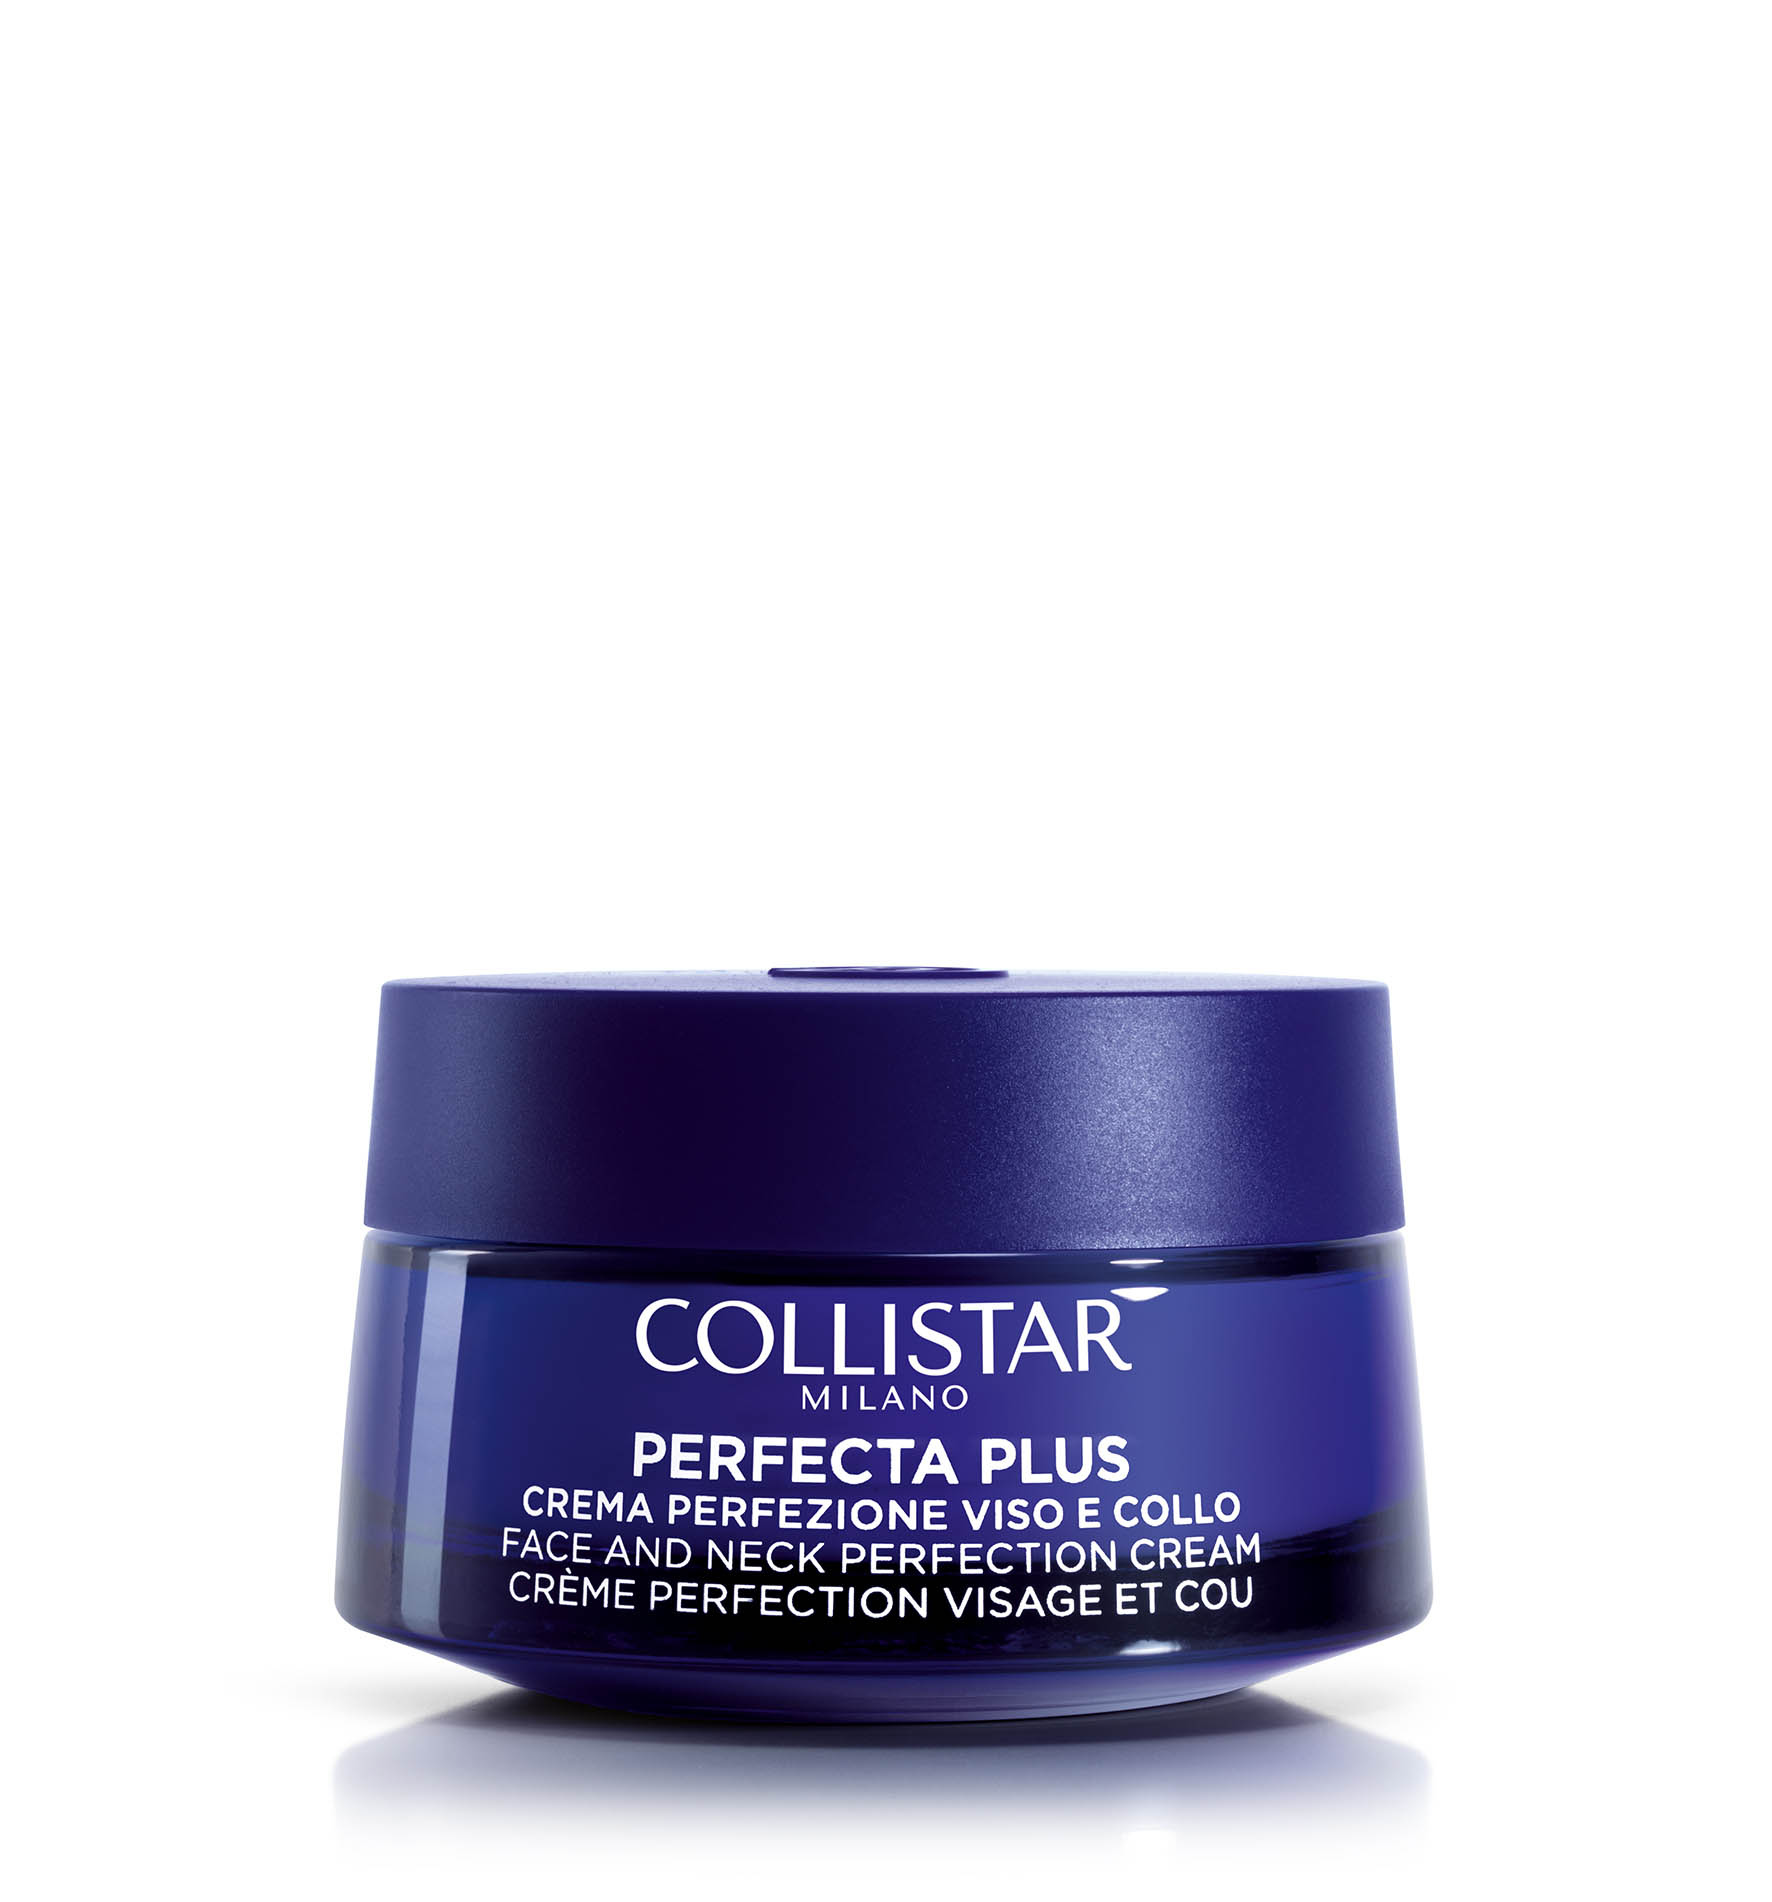 PERFECTA PLUS FACE AND NECK PERFECTION CREAM - Loss of tone and compactness | Collistar - Shop Online Ufficiale